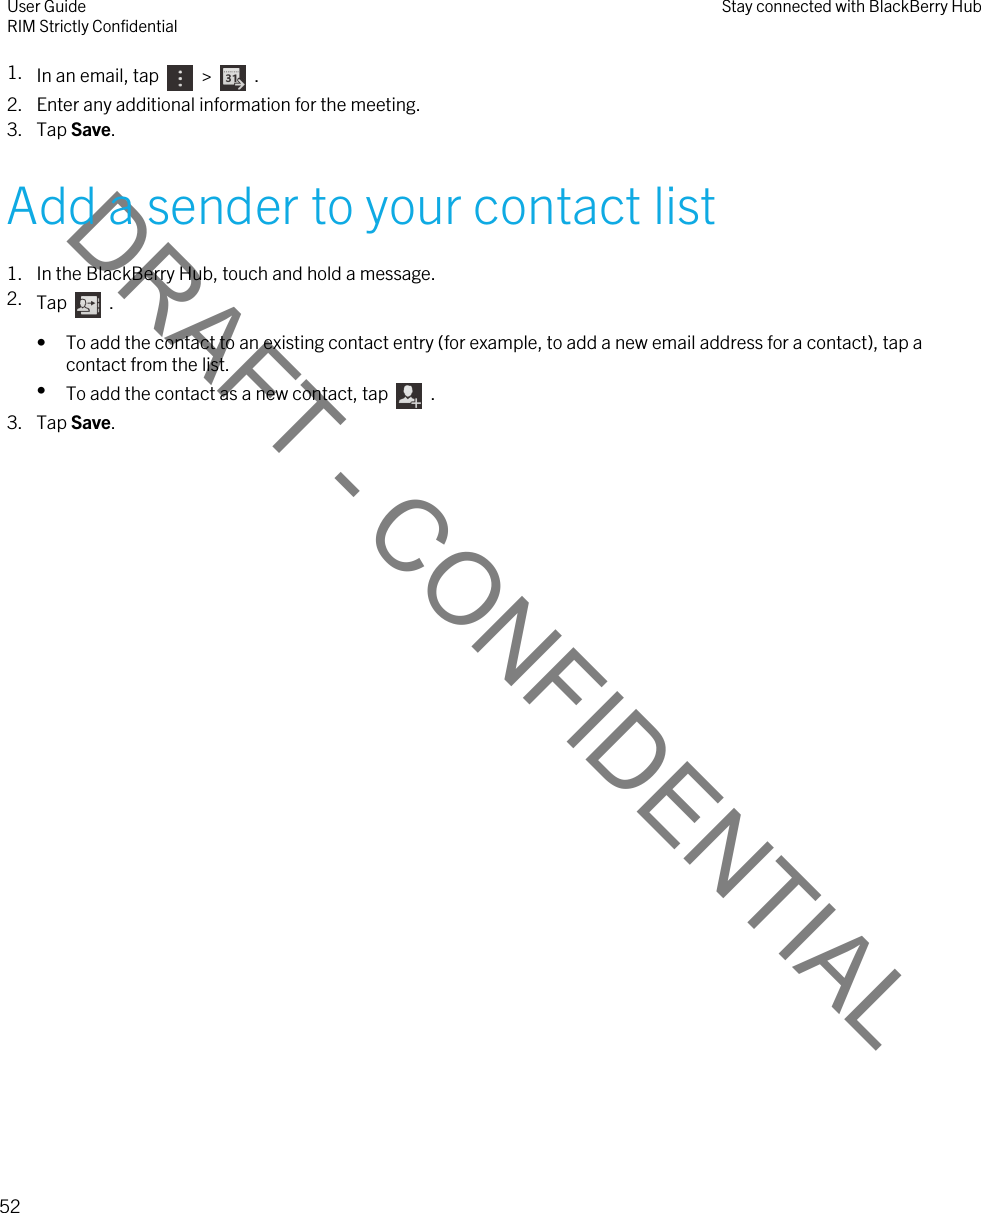 DRAFT - CONFIDENTIAL1. In an email, tap    &gt;    .2. Enter any additional information for the meeting.3. Tap Save.Add a sender to your contact list1. In the BlackBerry Hub, touch and hold a message.2. Tap    .• To add the contact to an existing contact entry (for example, to add a new email address for a contact), tap a contact from the list.•To add the contact as a new contact, tap    .3. Tap Save.User GuideRIM Strictly Confidential Stay connected with BlackBerry Hub52 